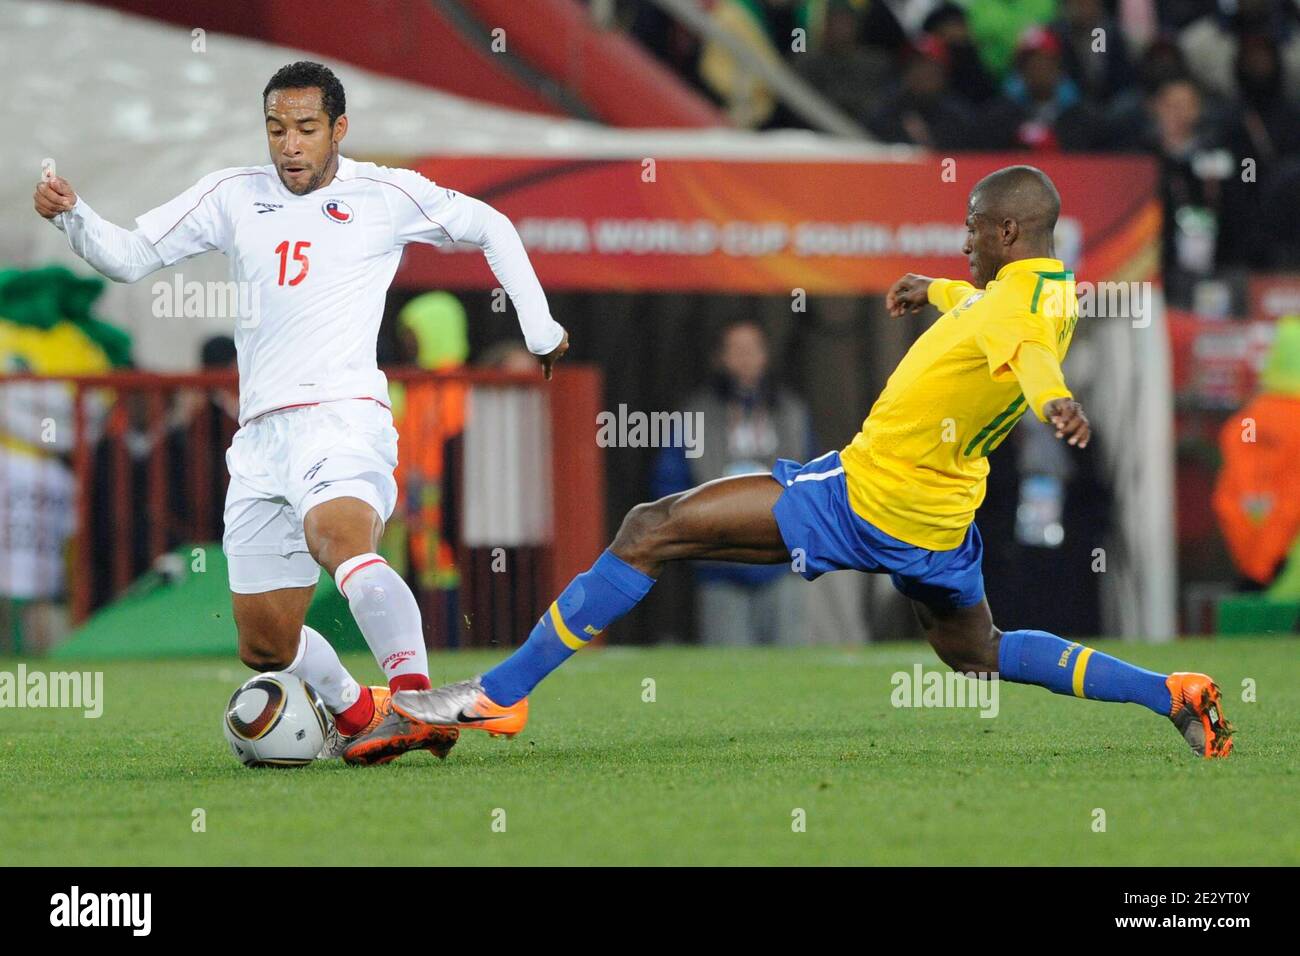 Brazil's Ramires battles Chile's Jean Beausejour during the 2010 FIFA World Cup South Africa 1/8 of final Soccer match, Brazil vs Chile at Ellis Park football stadium in Johannesburg, South Africa on June 28, 2010. Brazil won 3-0. Photo by Henri Szwarc/Cameleon/ABACAPRESS.COM Stock Photo